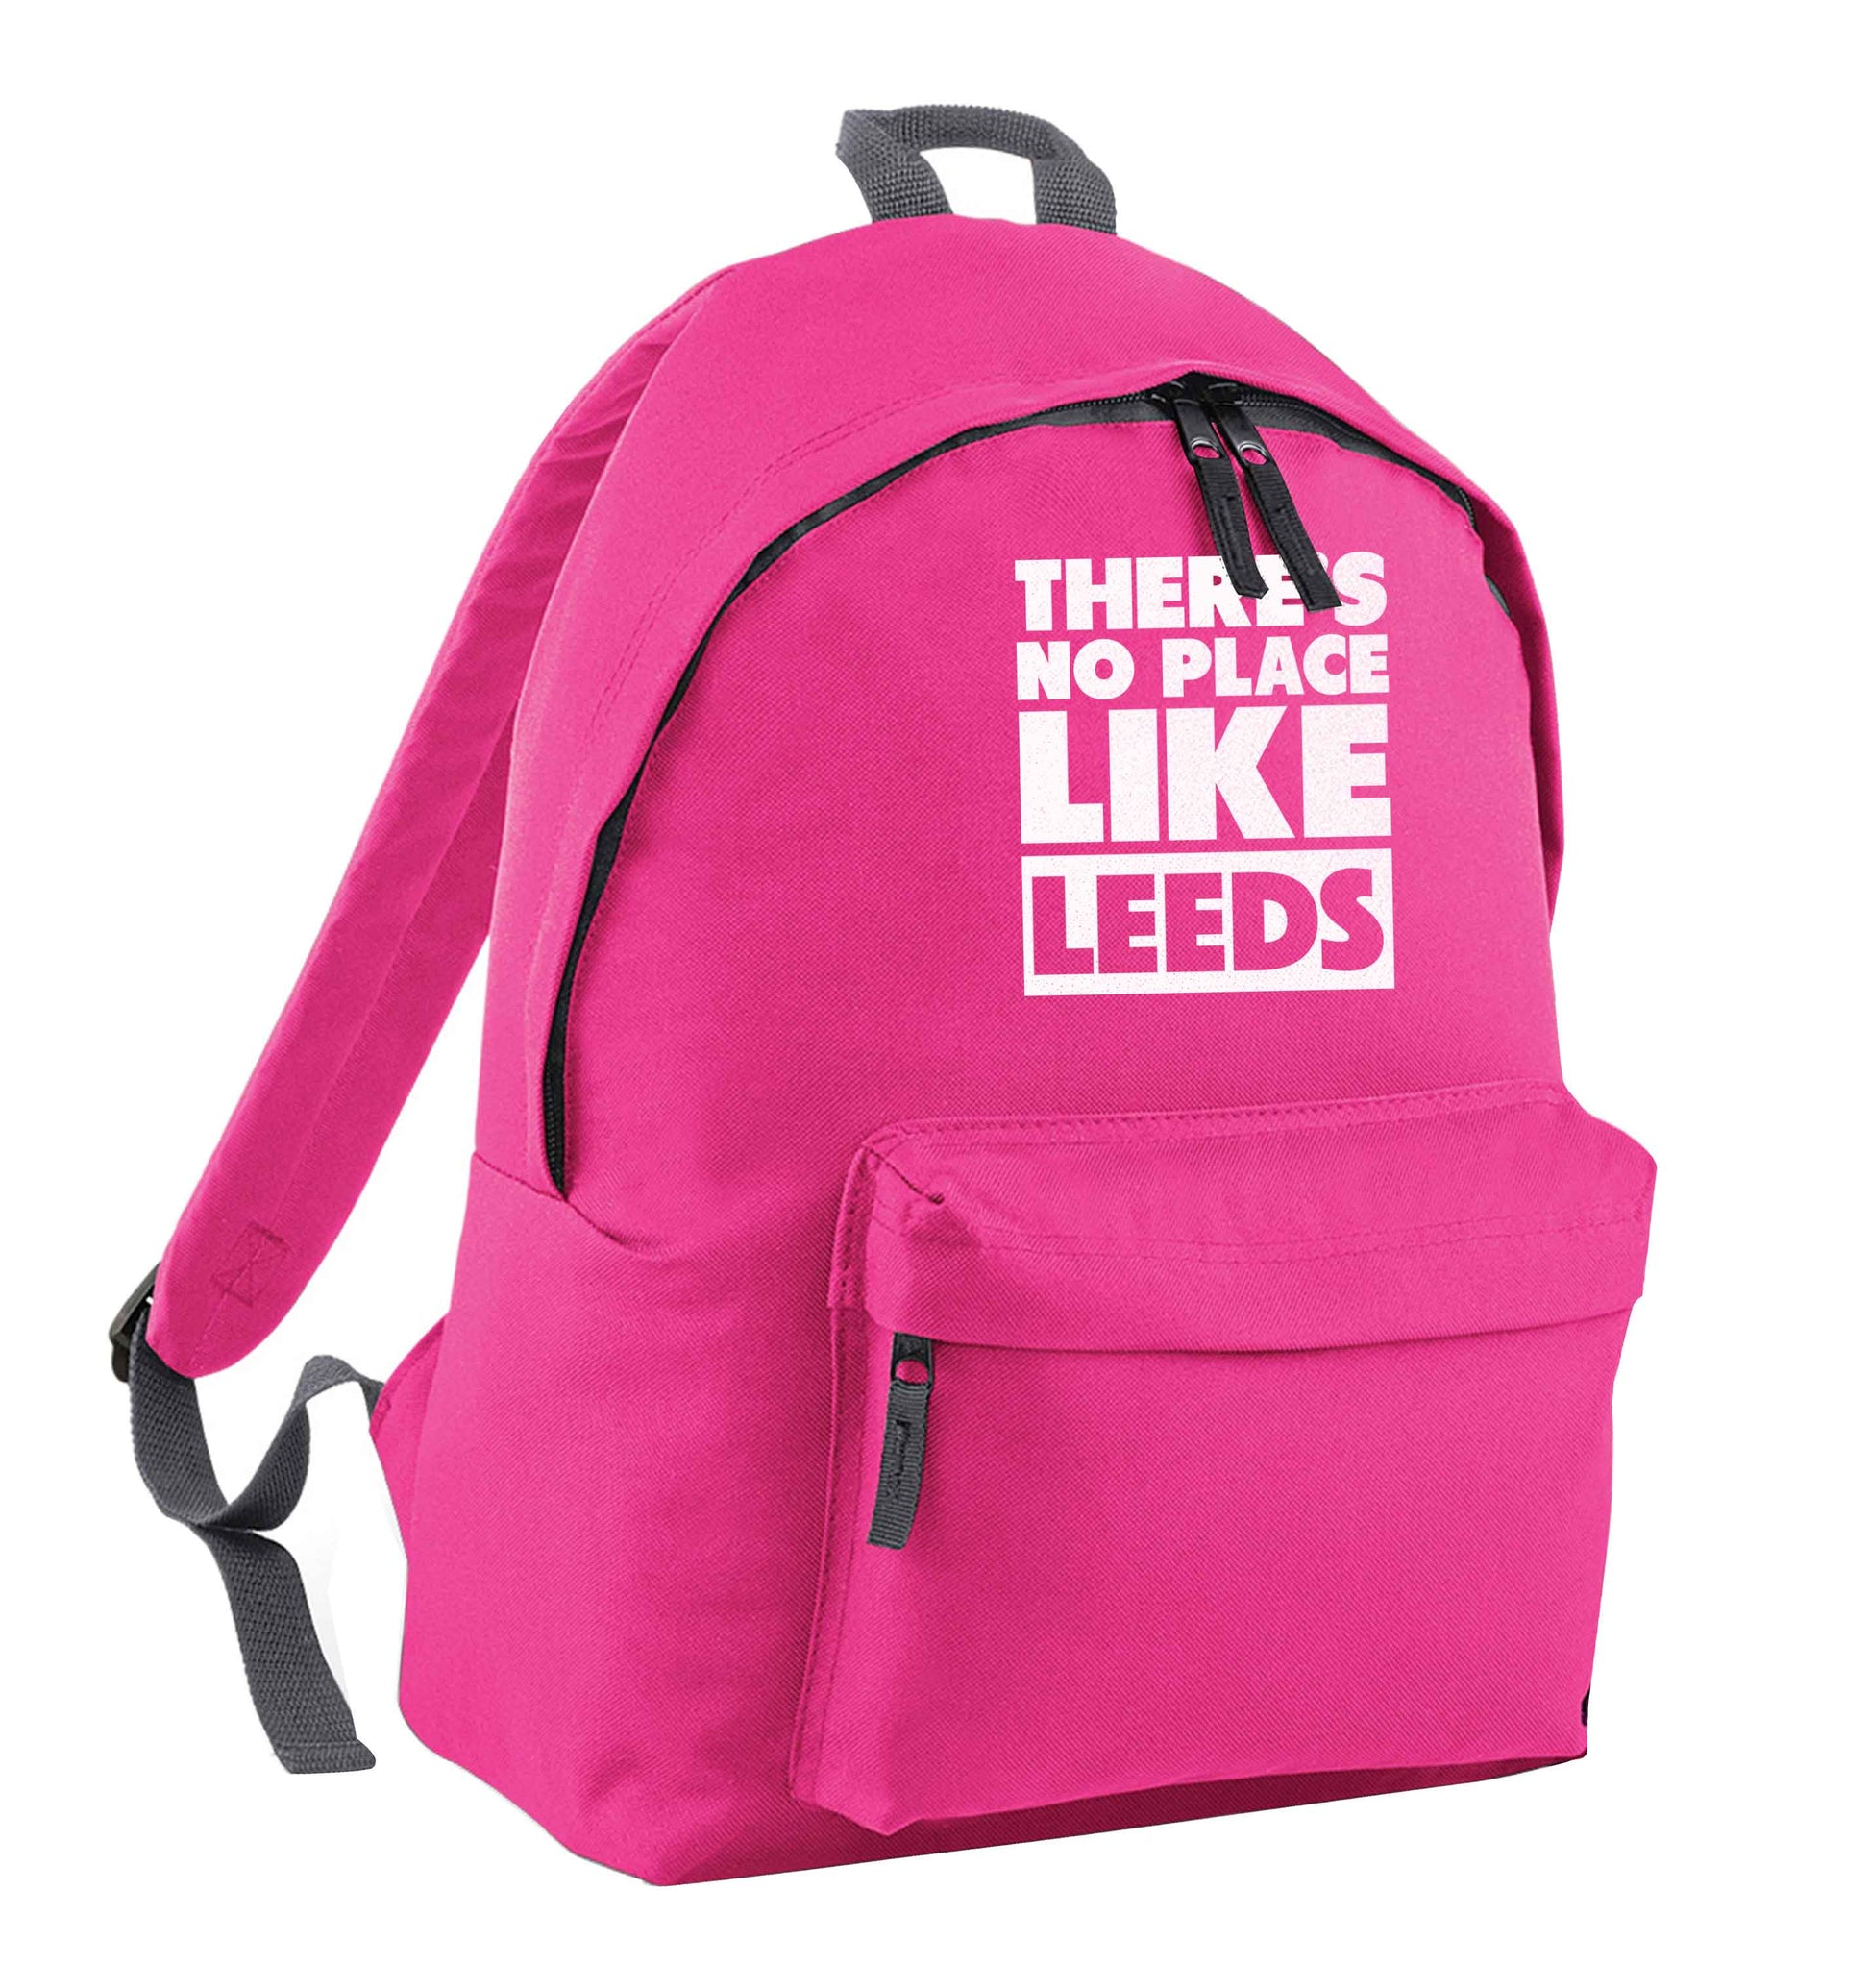 There's no place like Leeds pink children's backpack